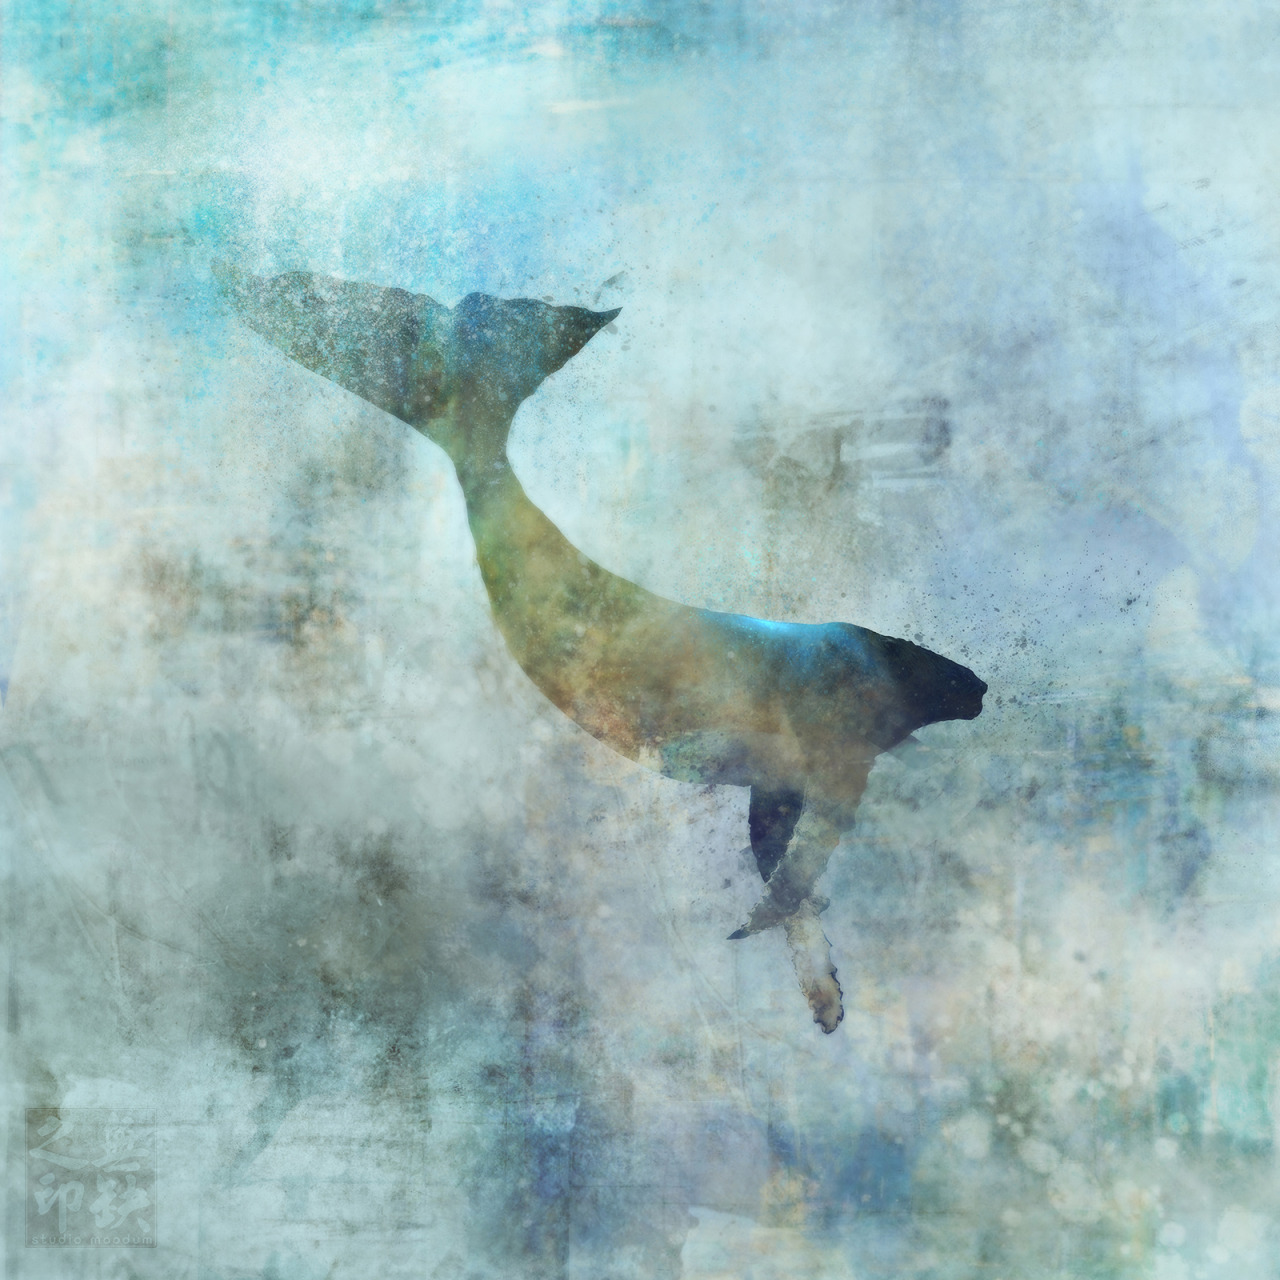 Ken Roko Sea Whale 01: Giclee Fine Art Print 13X19 Please Check out more images from Etsy.com: https://www.etsy.com/ca/shop/krokoart?section_id=12474863